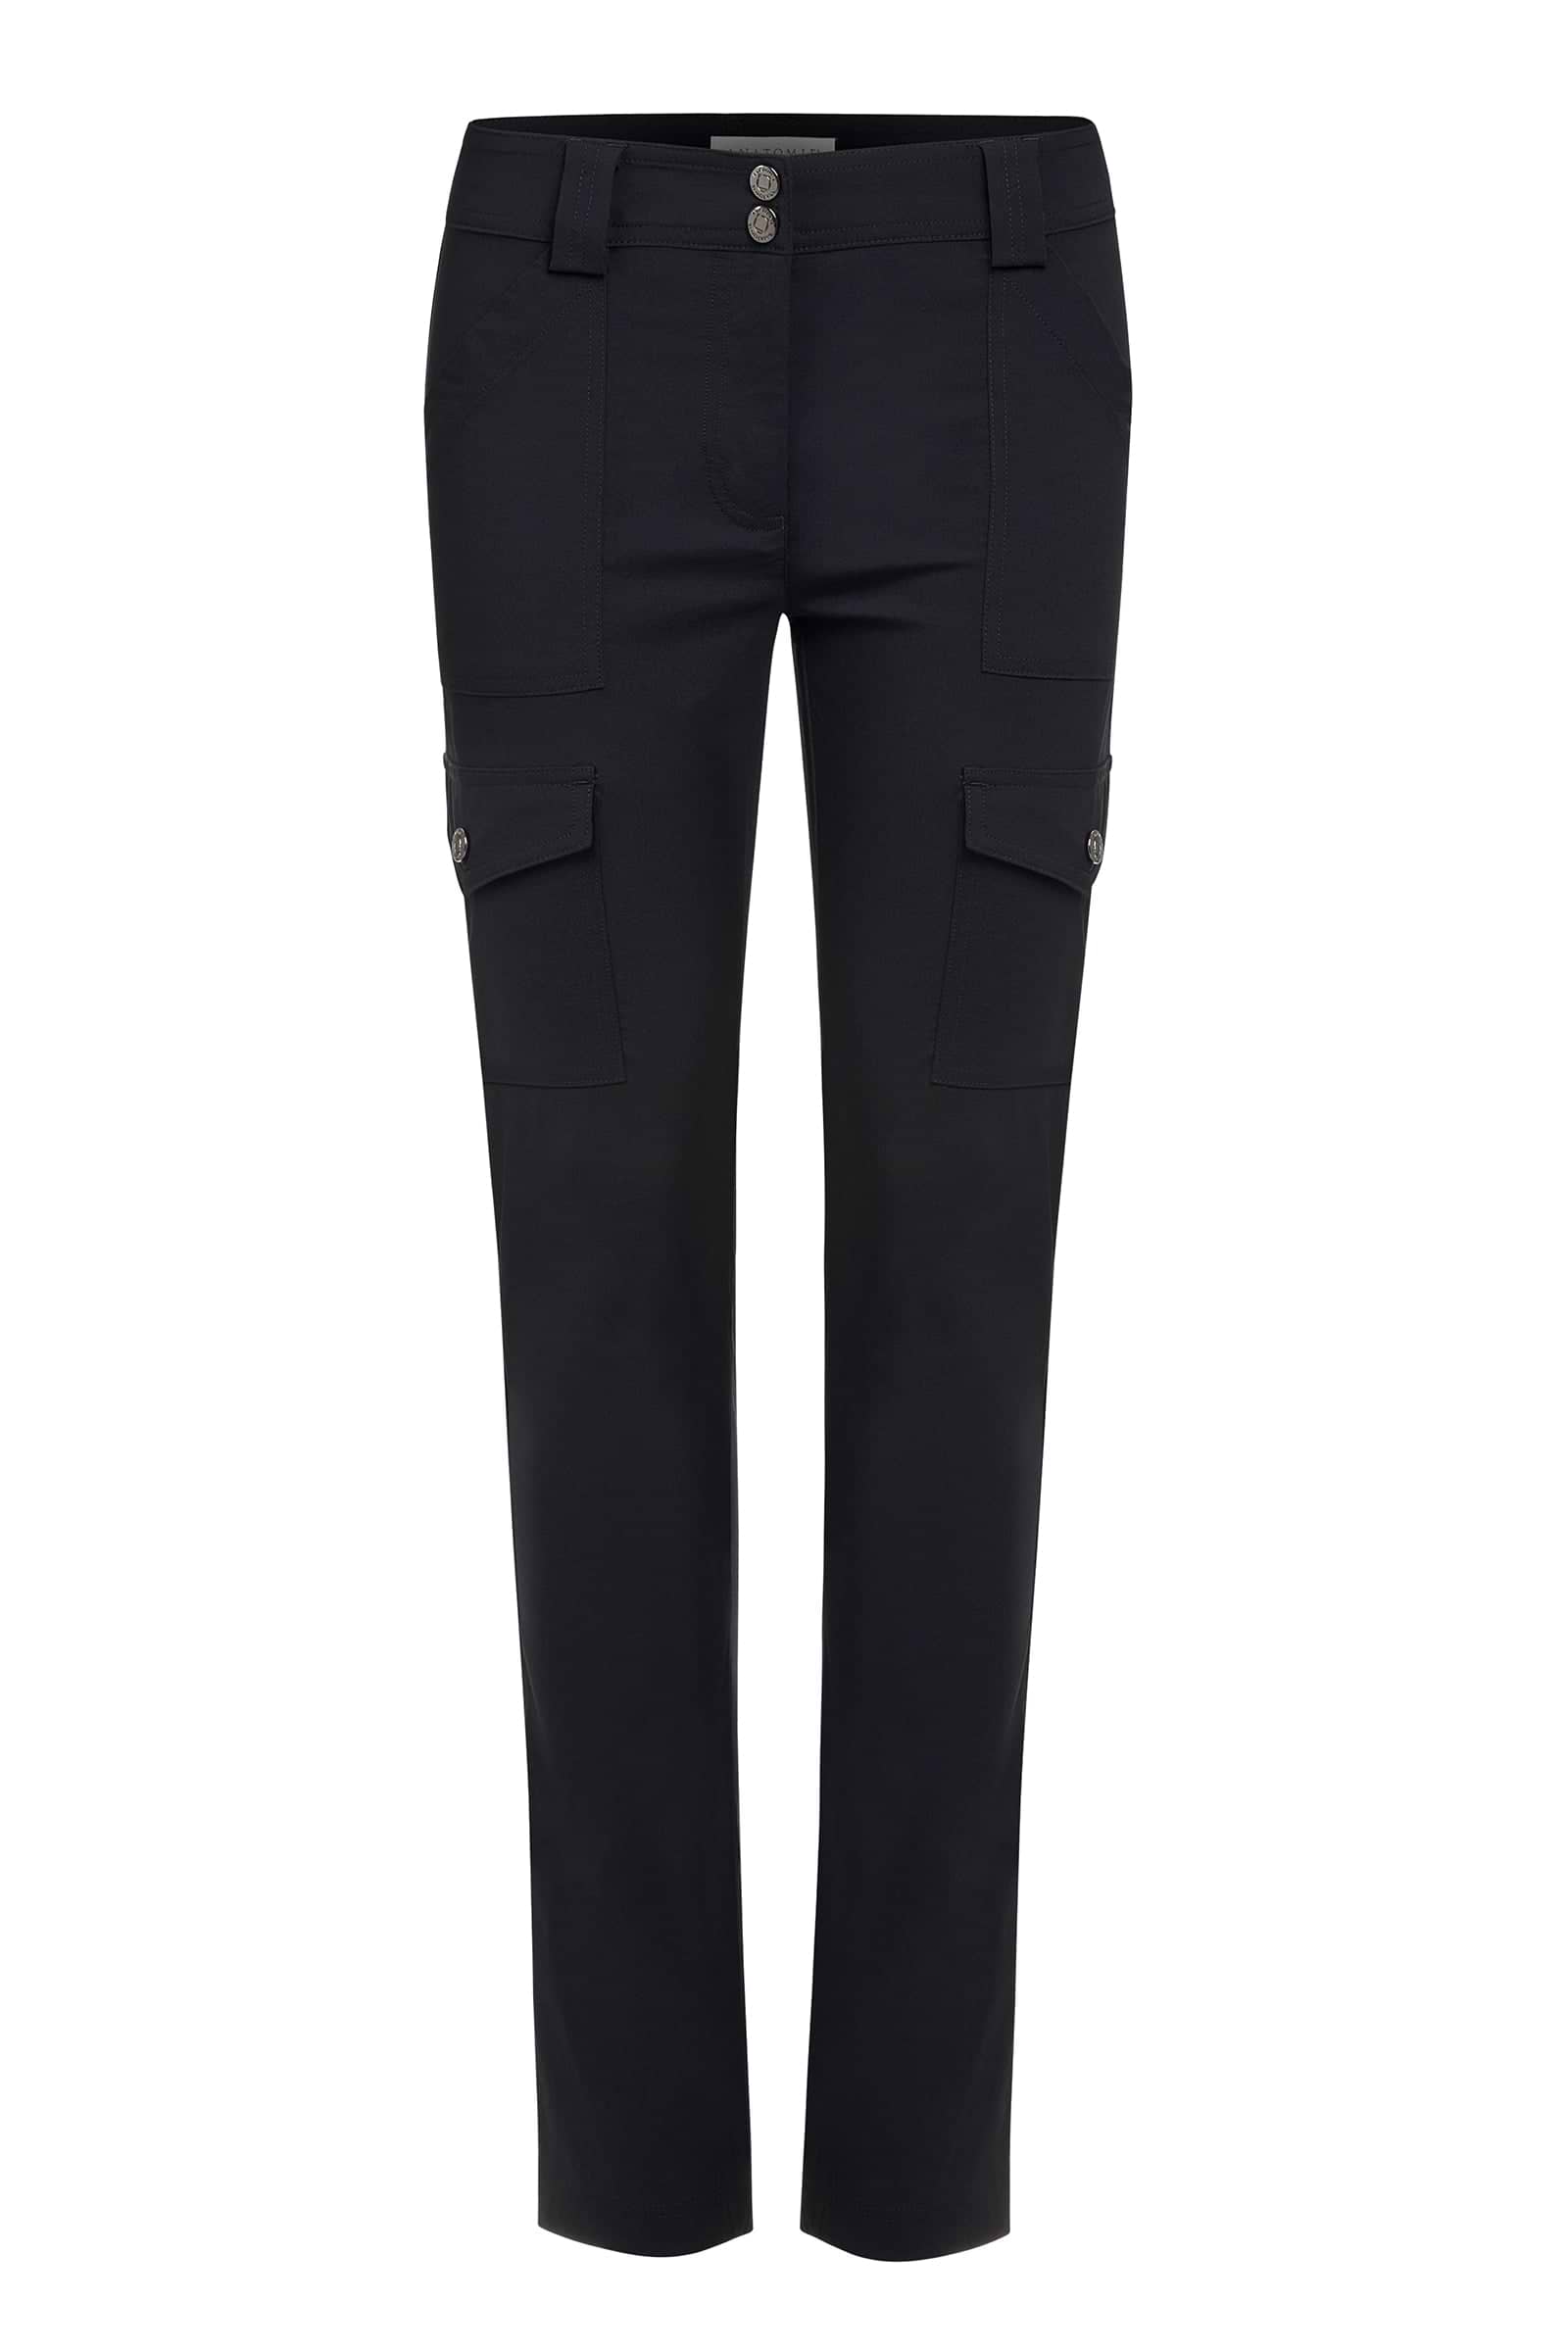 The Kate Skinny Cargo Pant